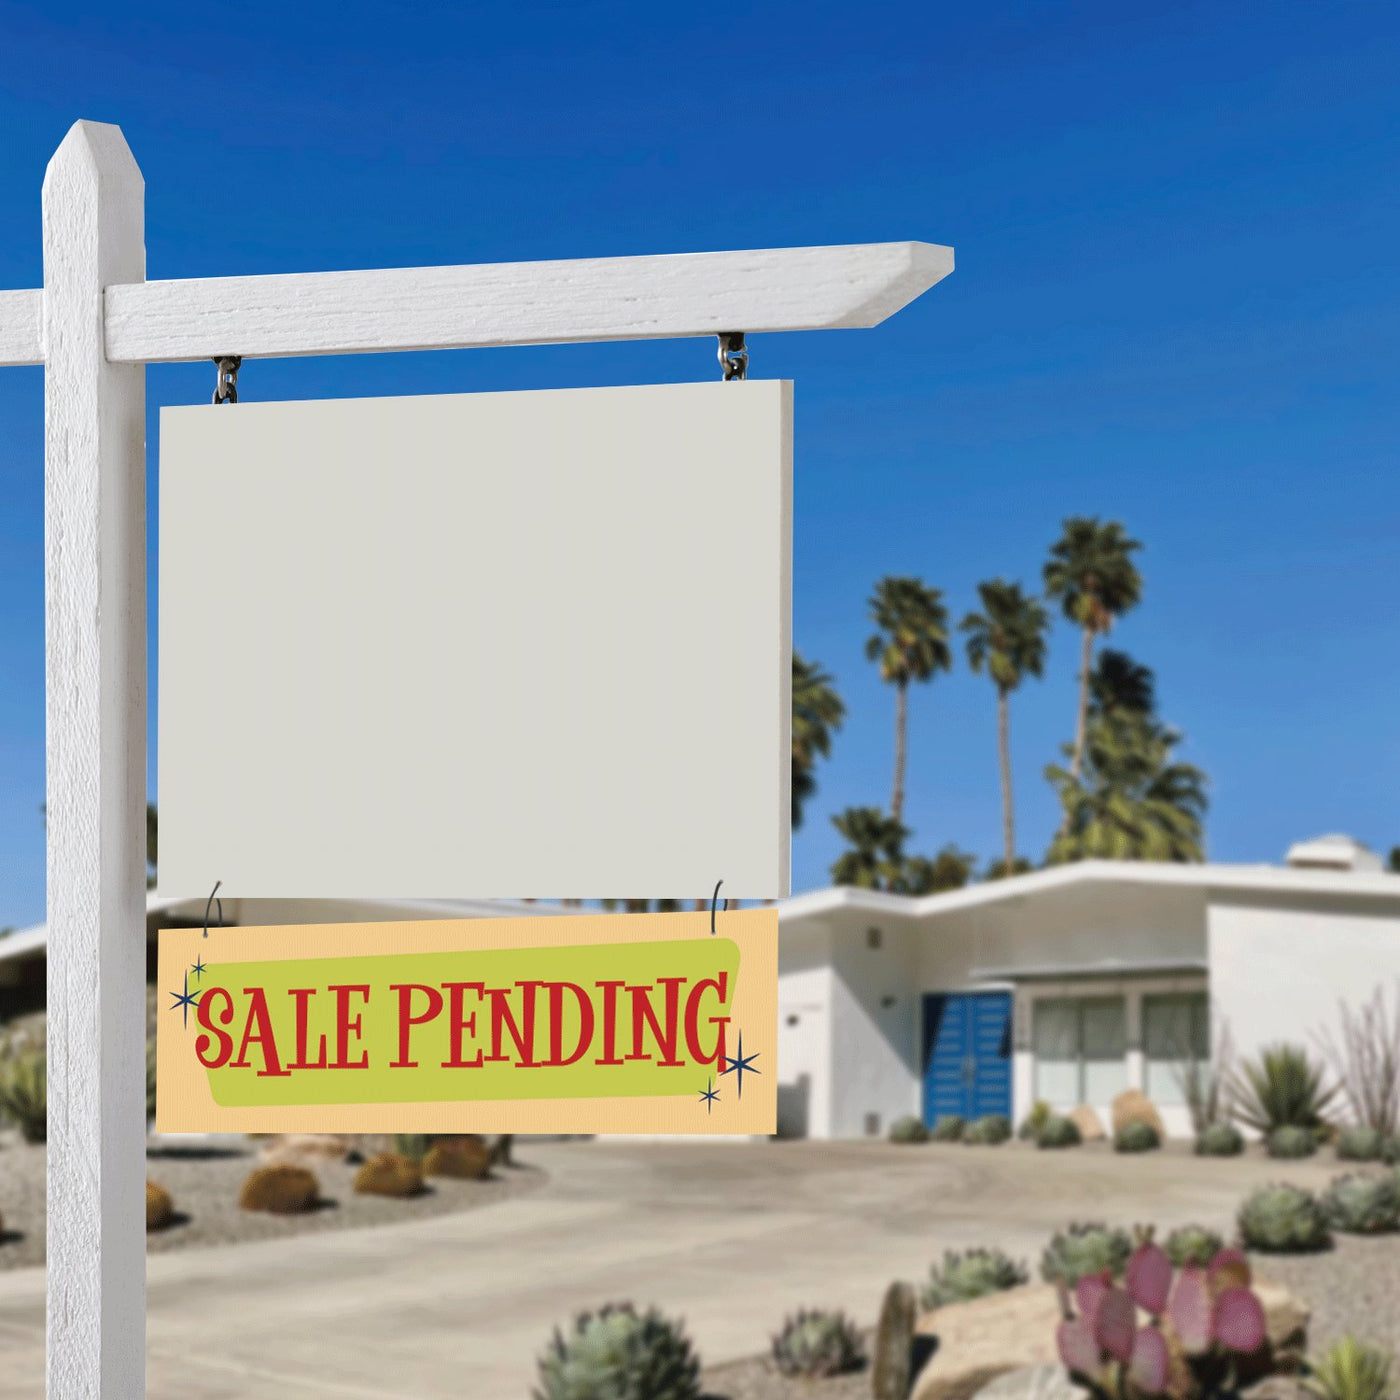 Sale Pending - Mid Century - All Things Real Estate